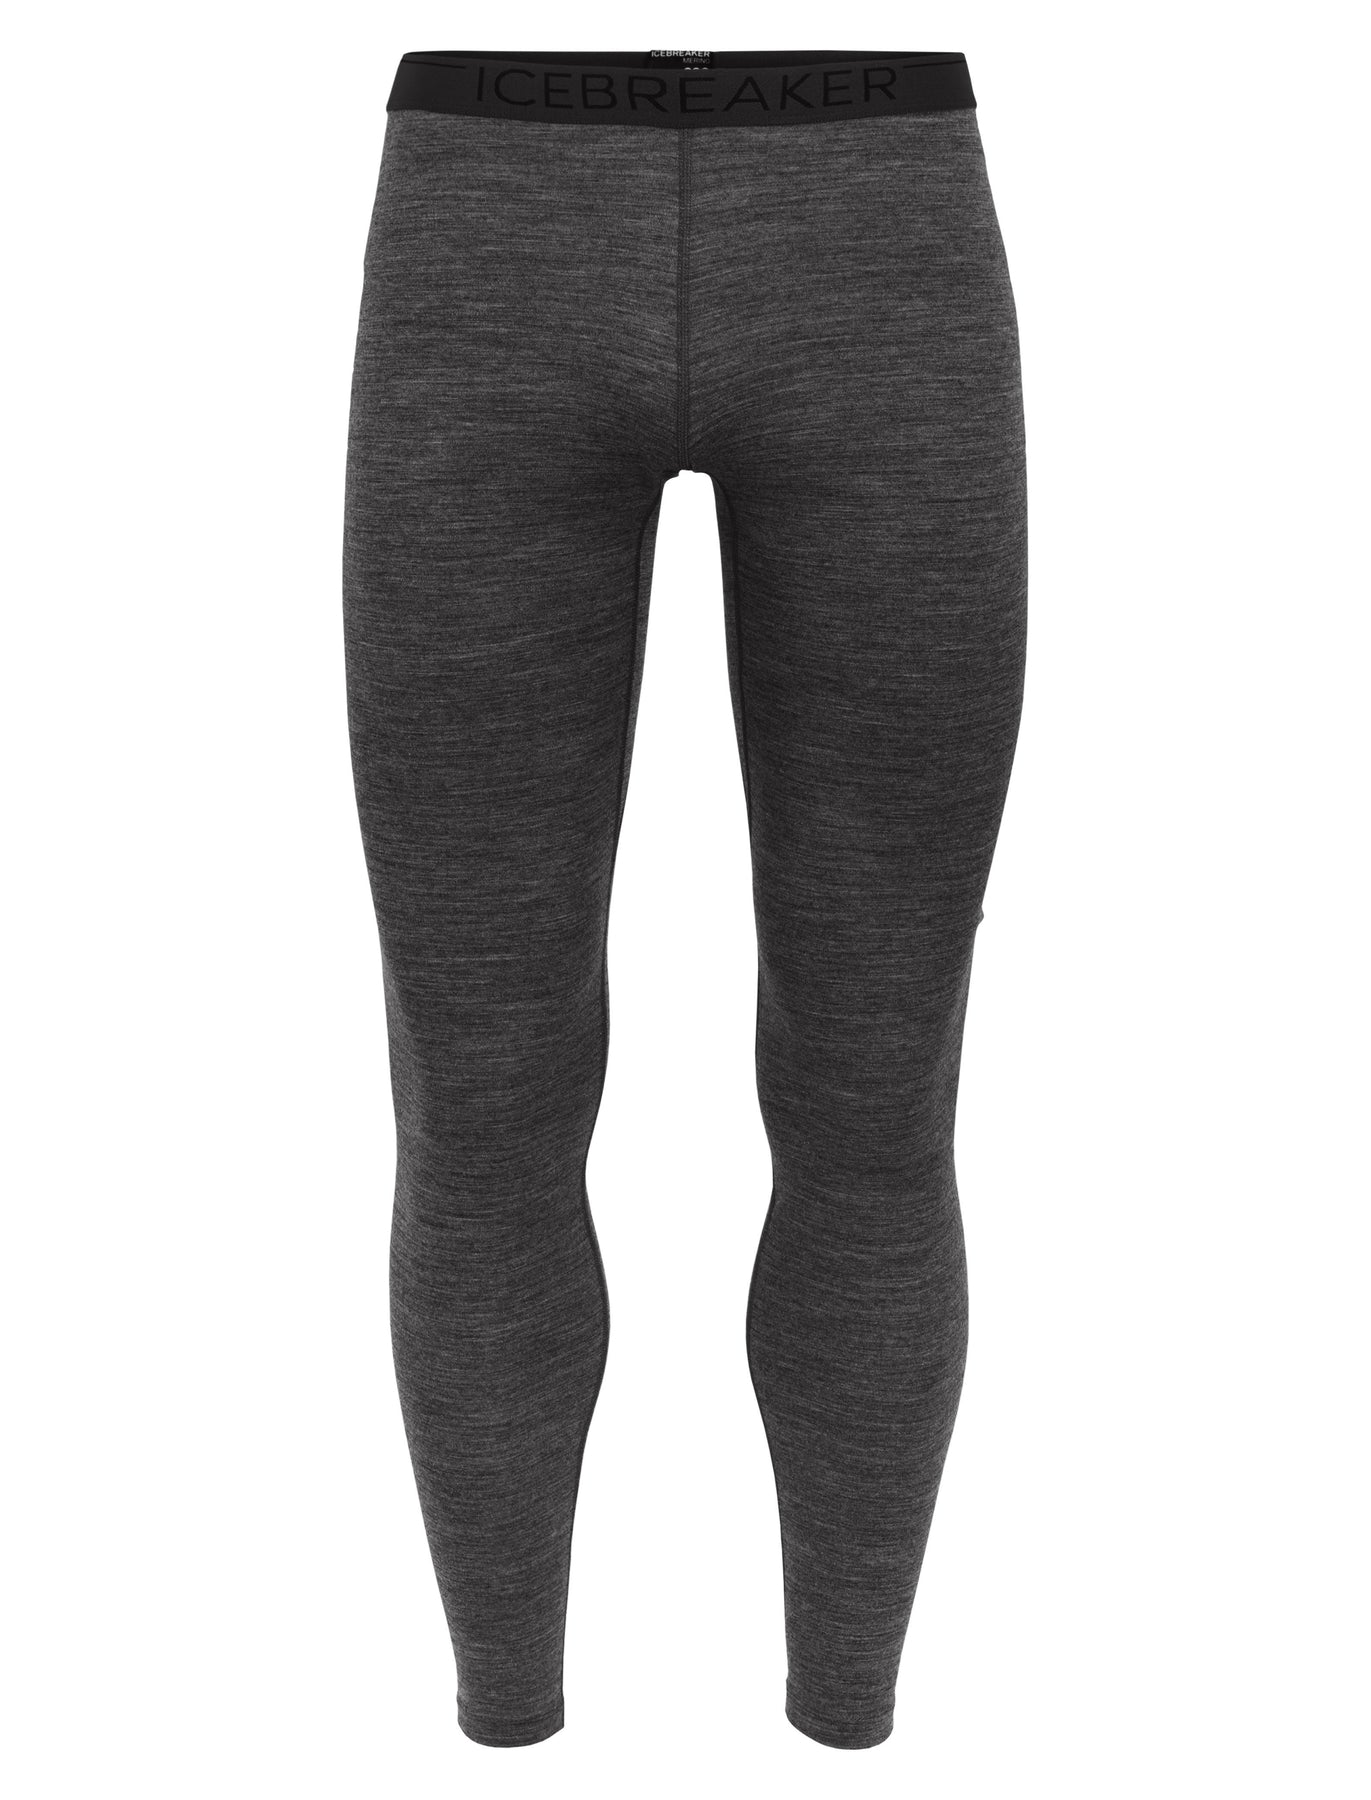 W's 200 Oasis Leggings - The Guides Hut